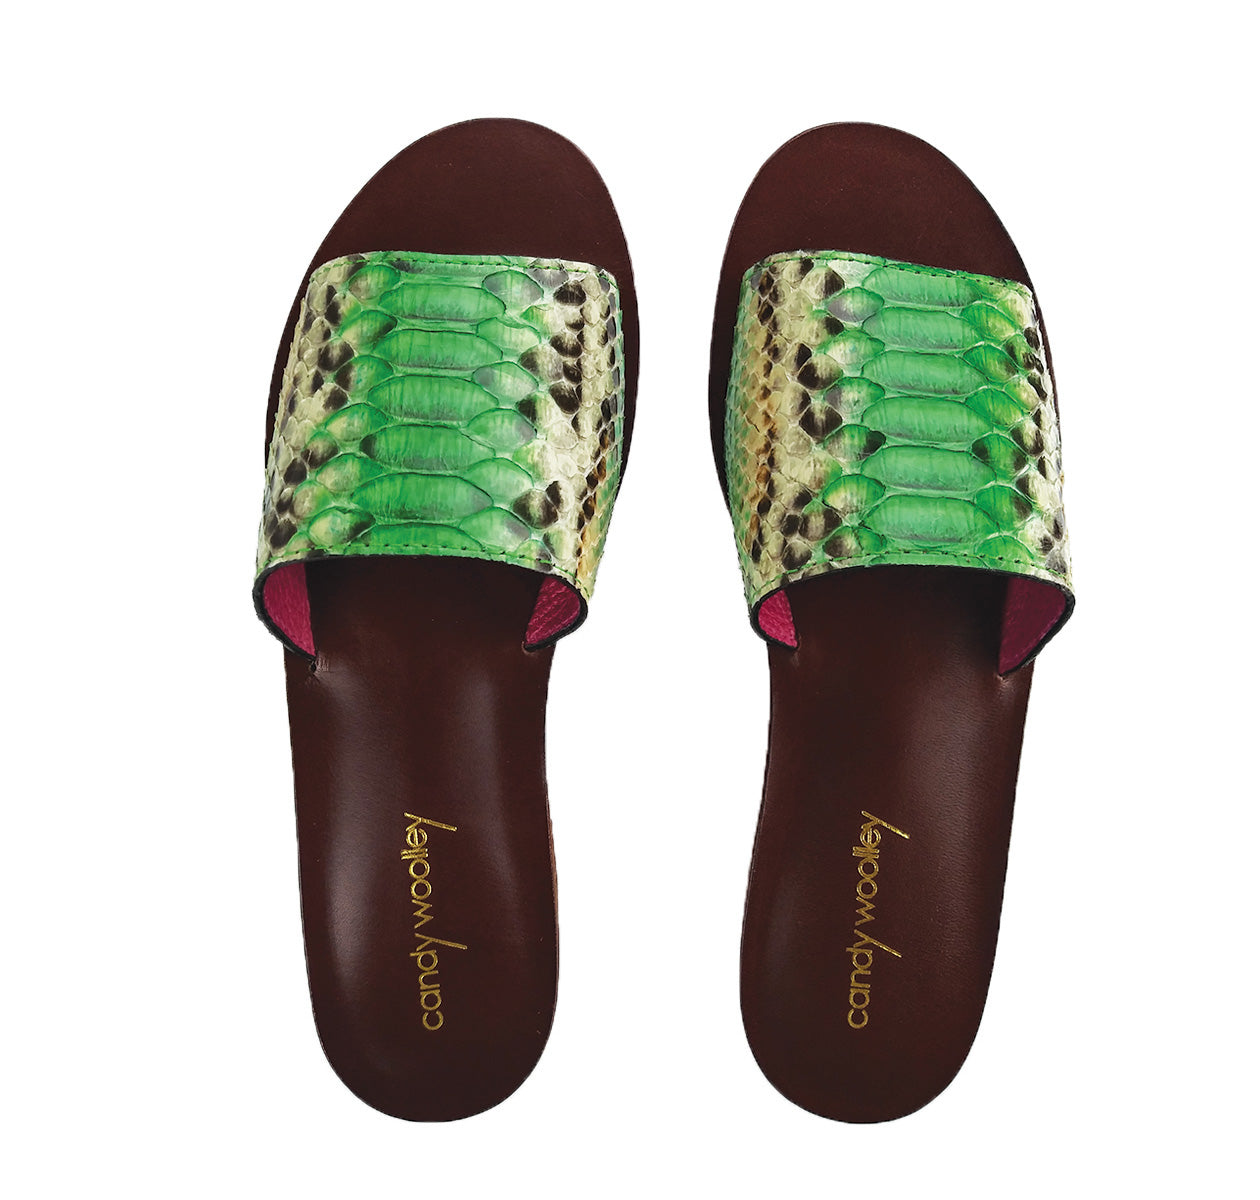 Genuine Python, Green & Cream Flat Slide Sandals. Size Available 7. [NEW: NON-SLIP & SOLE PROTECTOR]